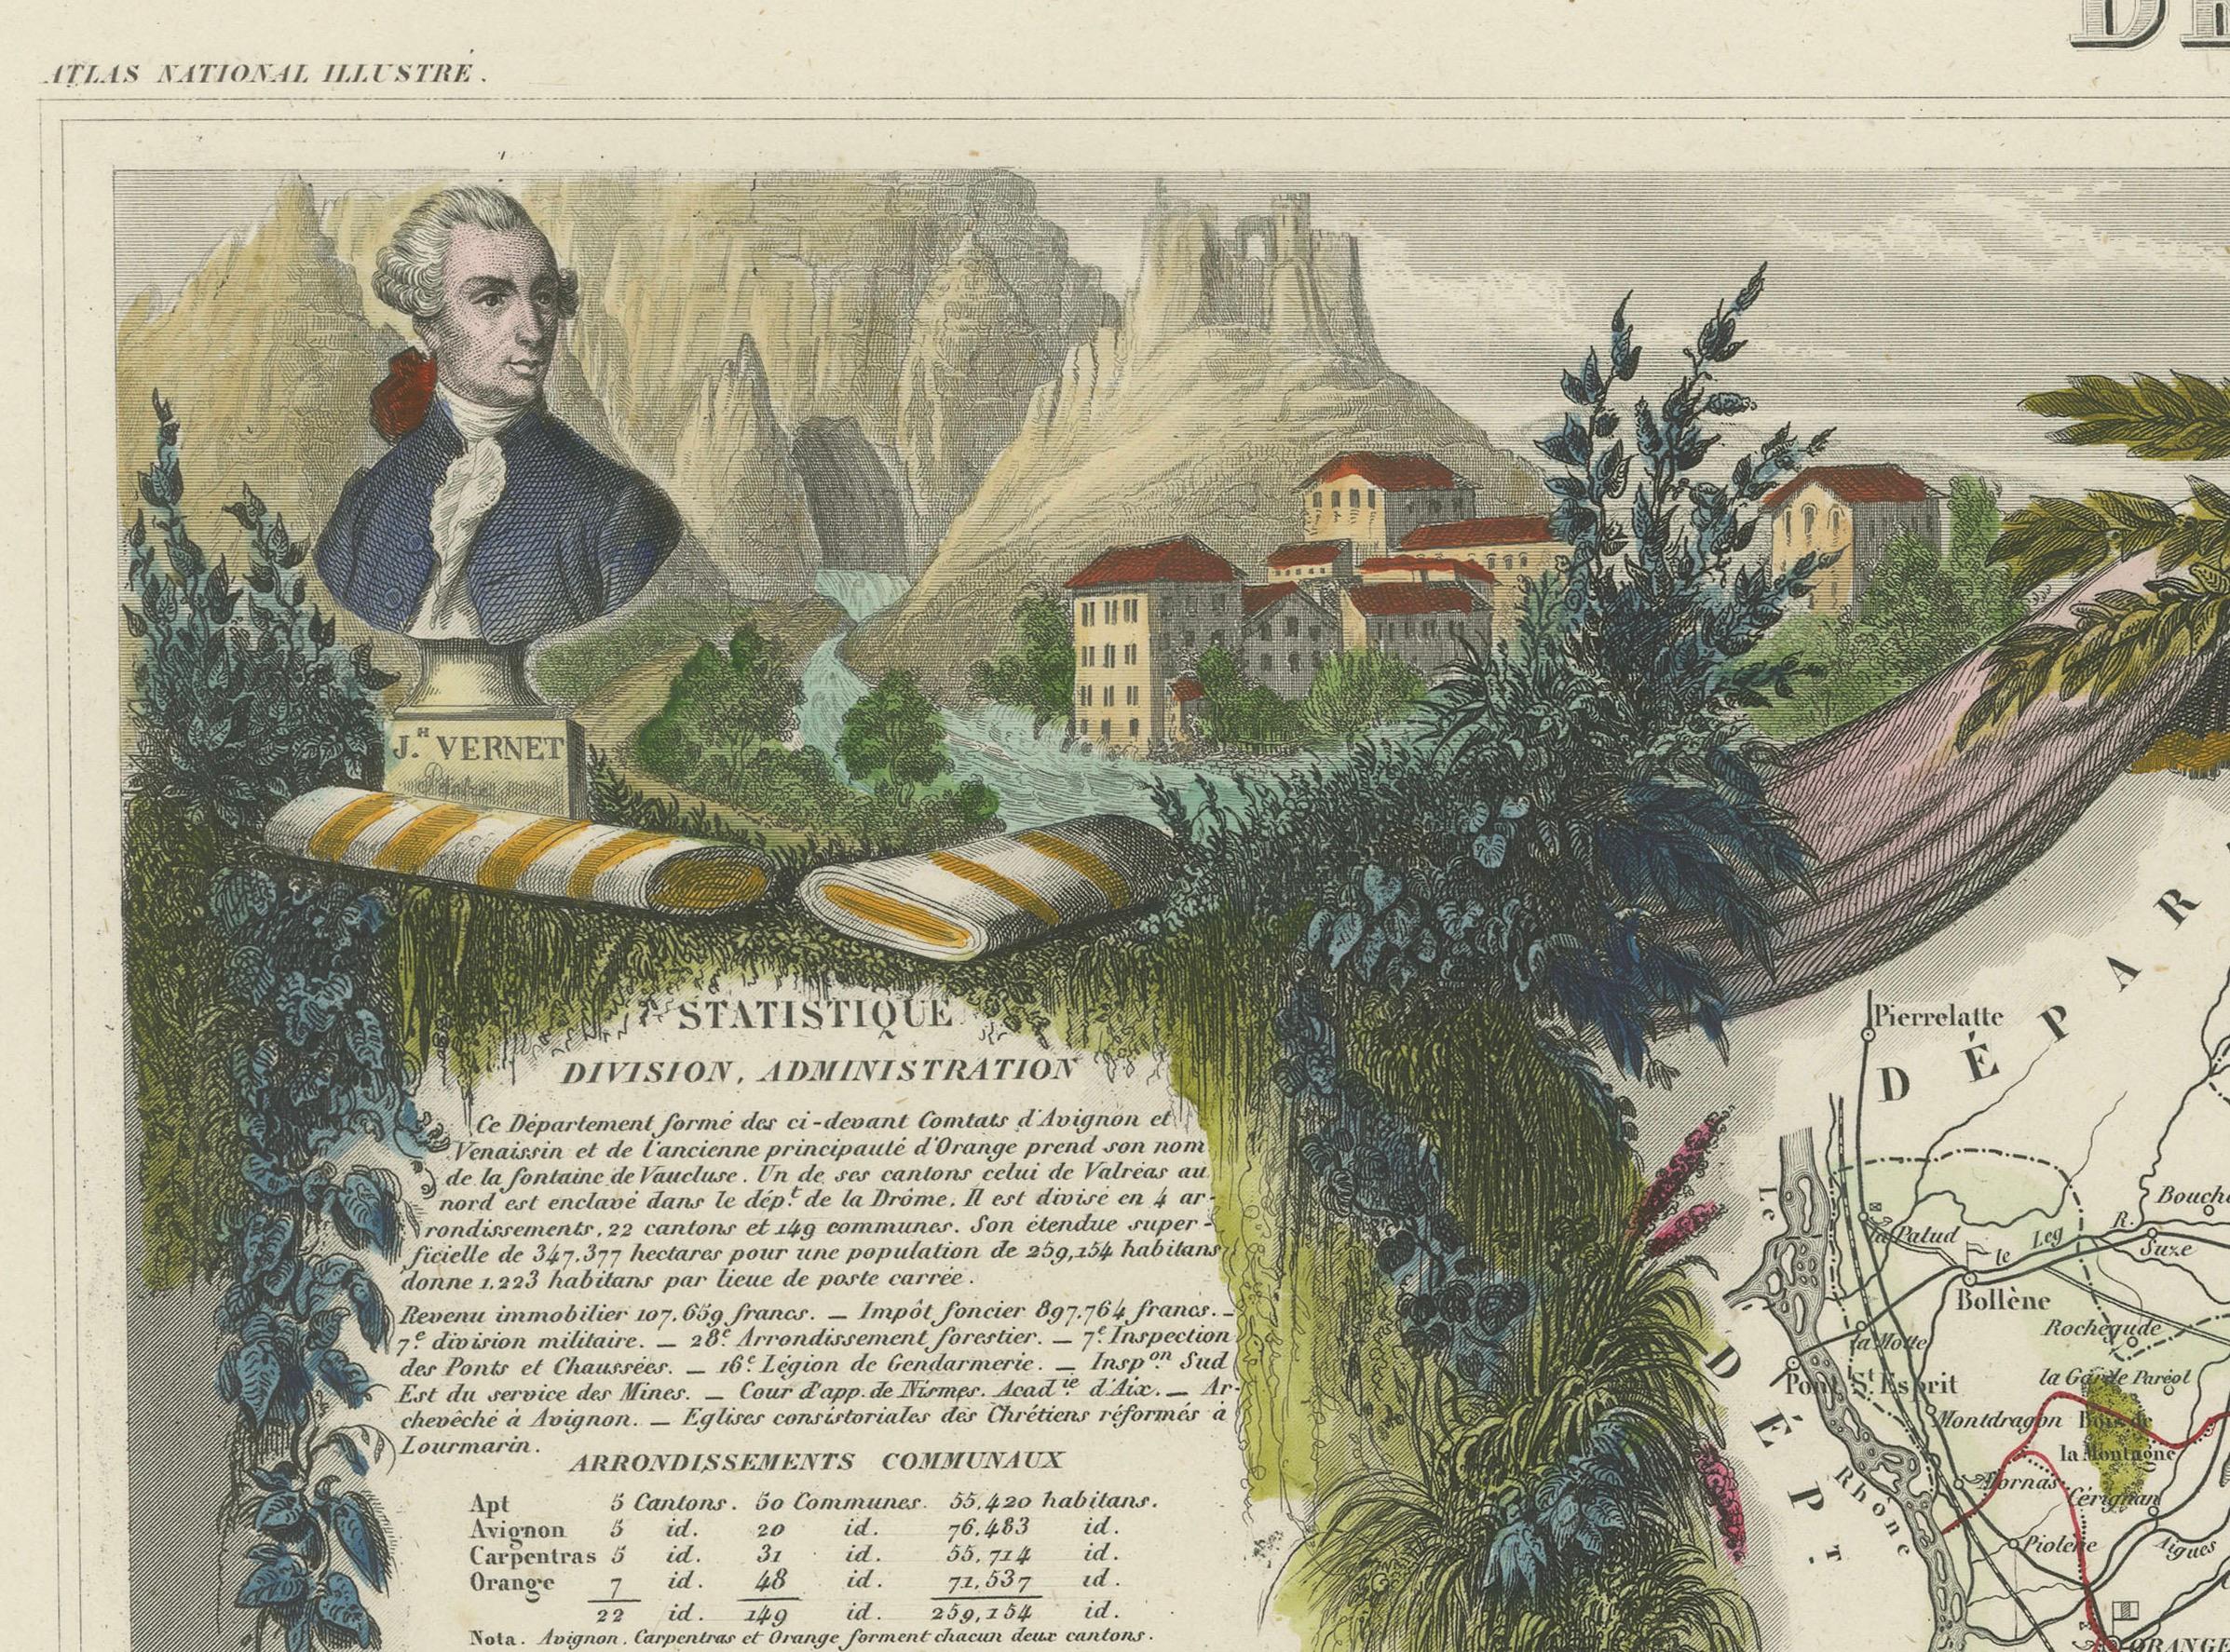 Old Map of Vaucluse, France : A Cartographic Celebration of Viticulture, 1852 en vente 1